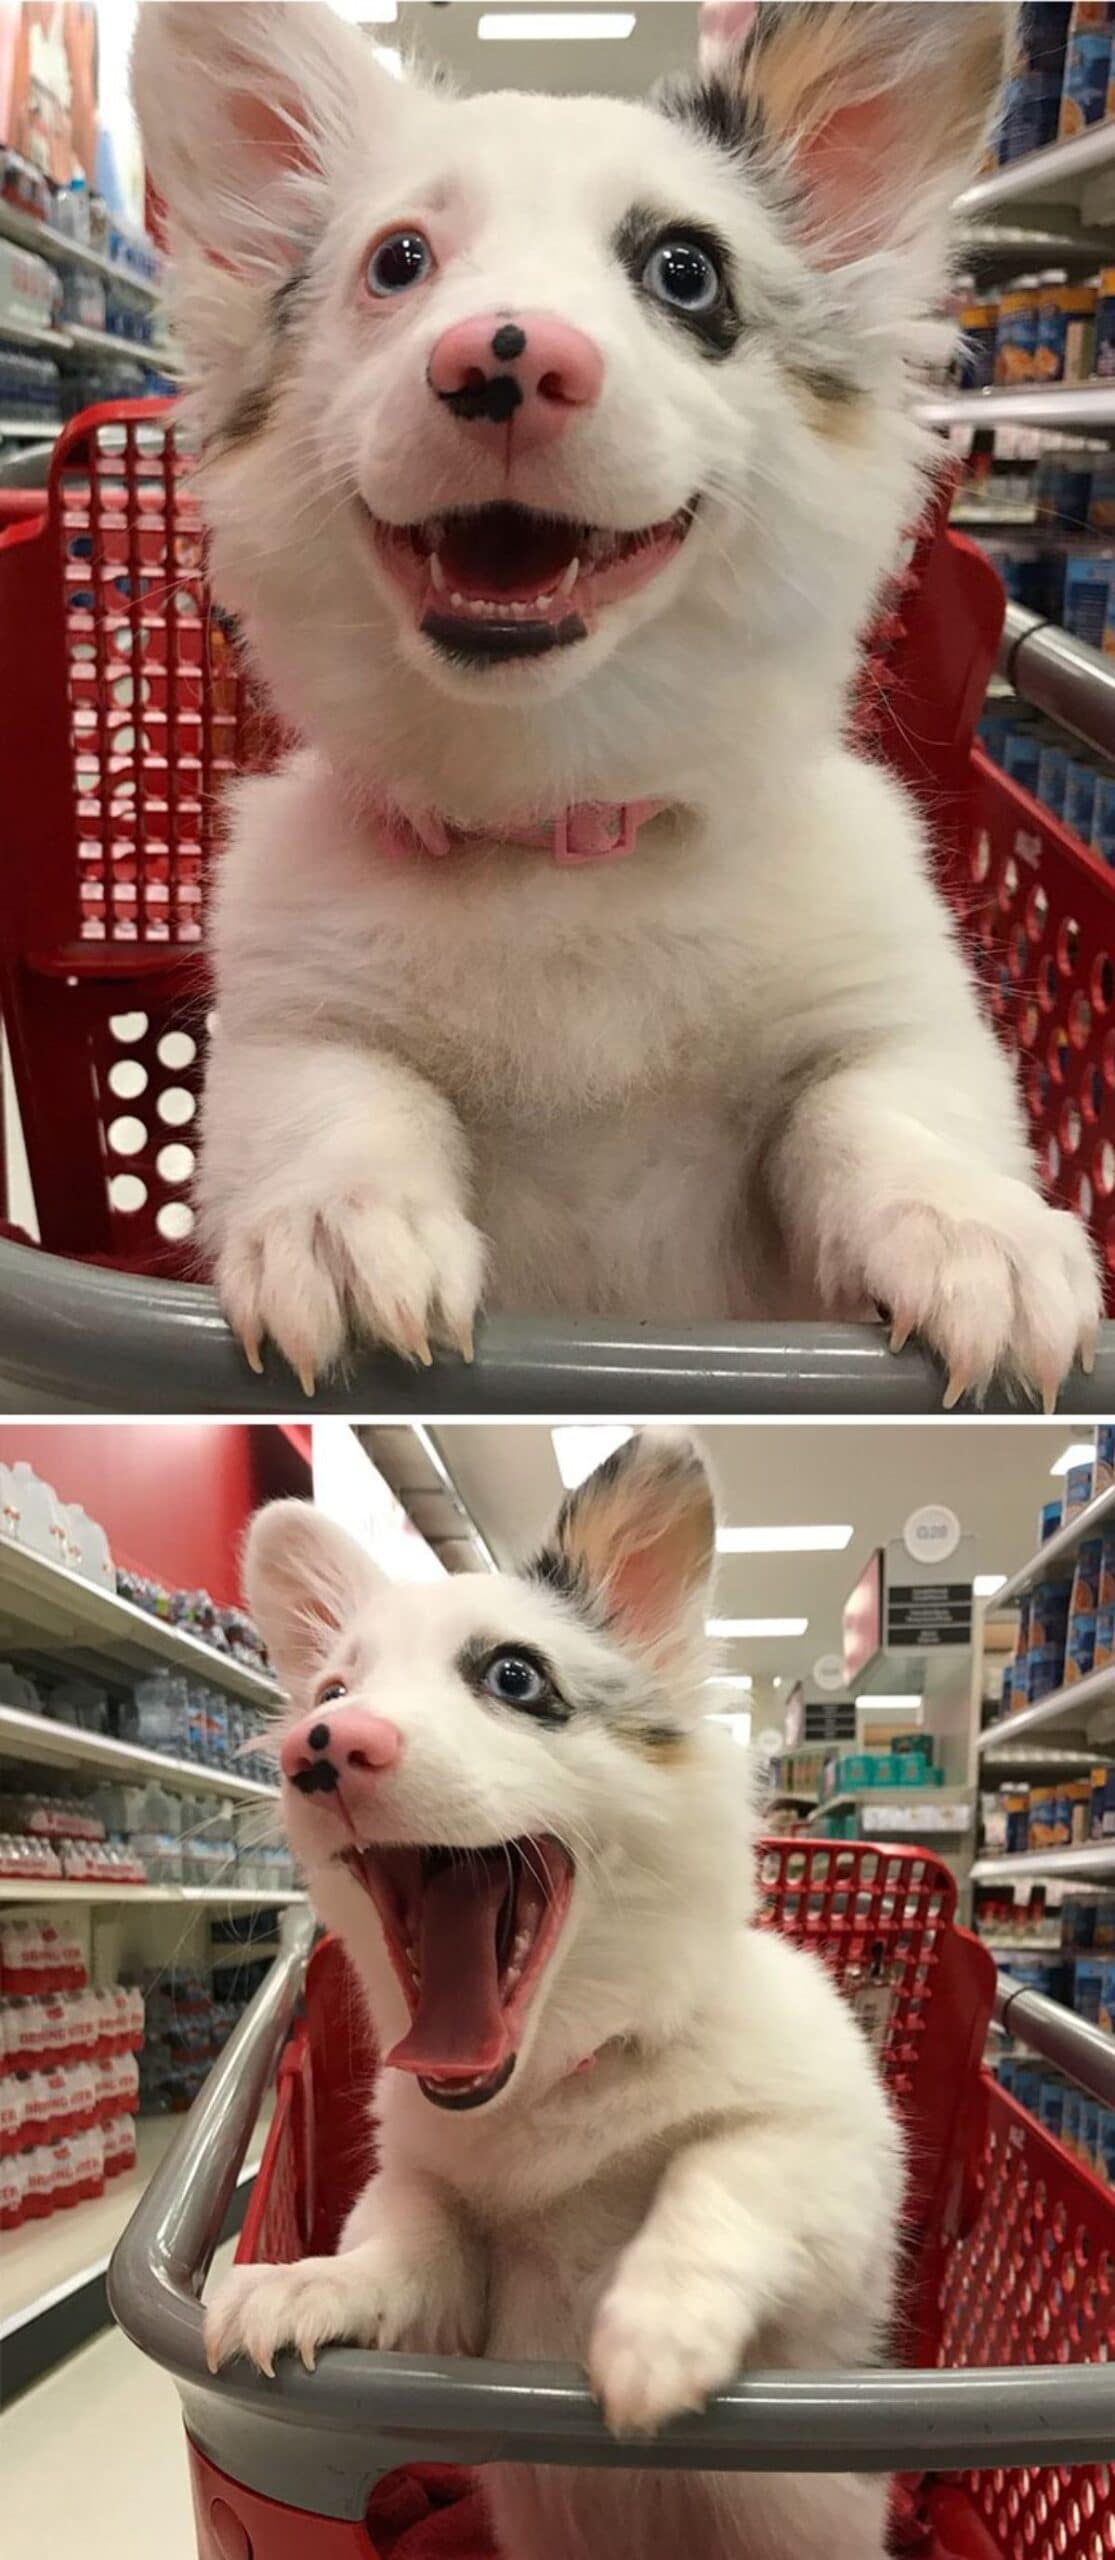 2 photos of a white australian shepherd puppy in a red trolley inside a grocery store